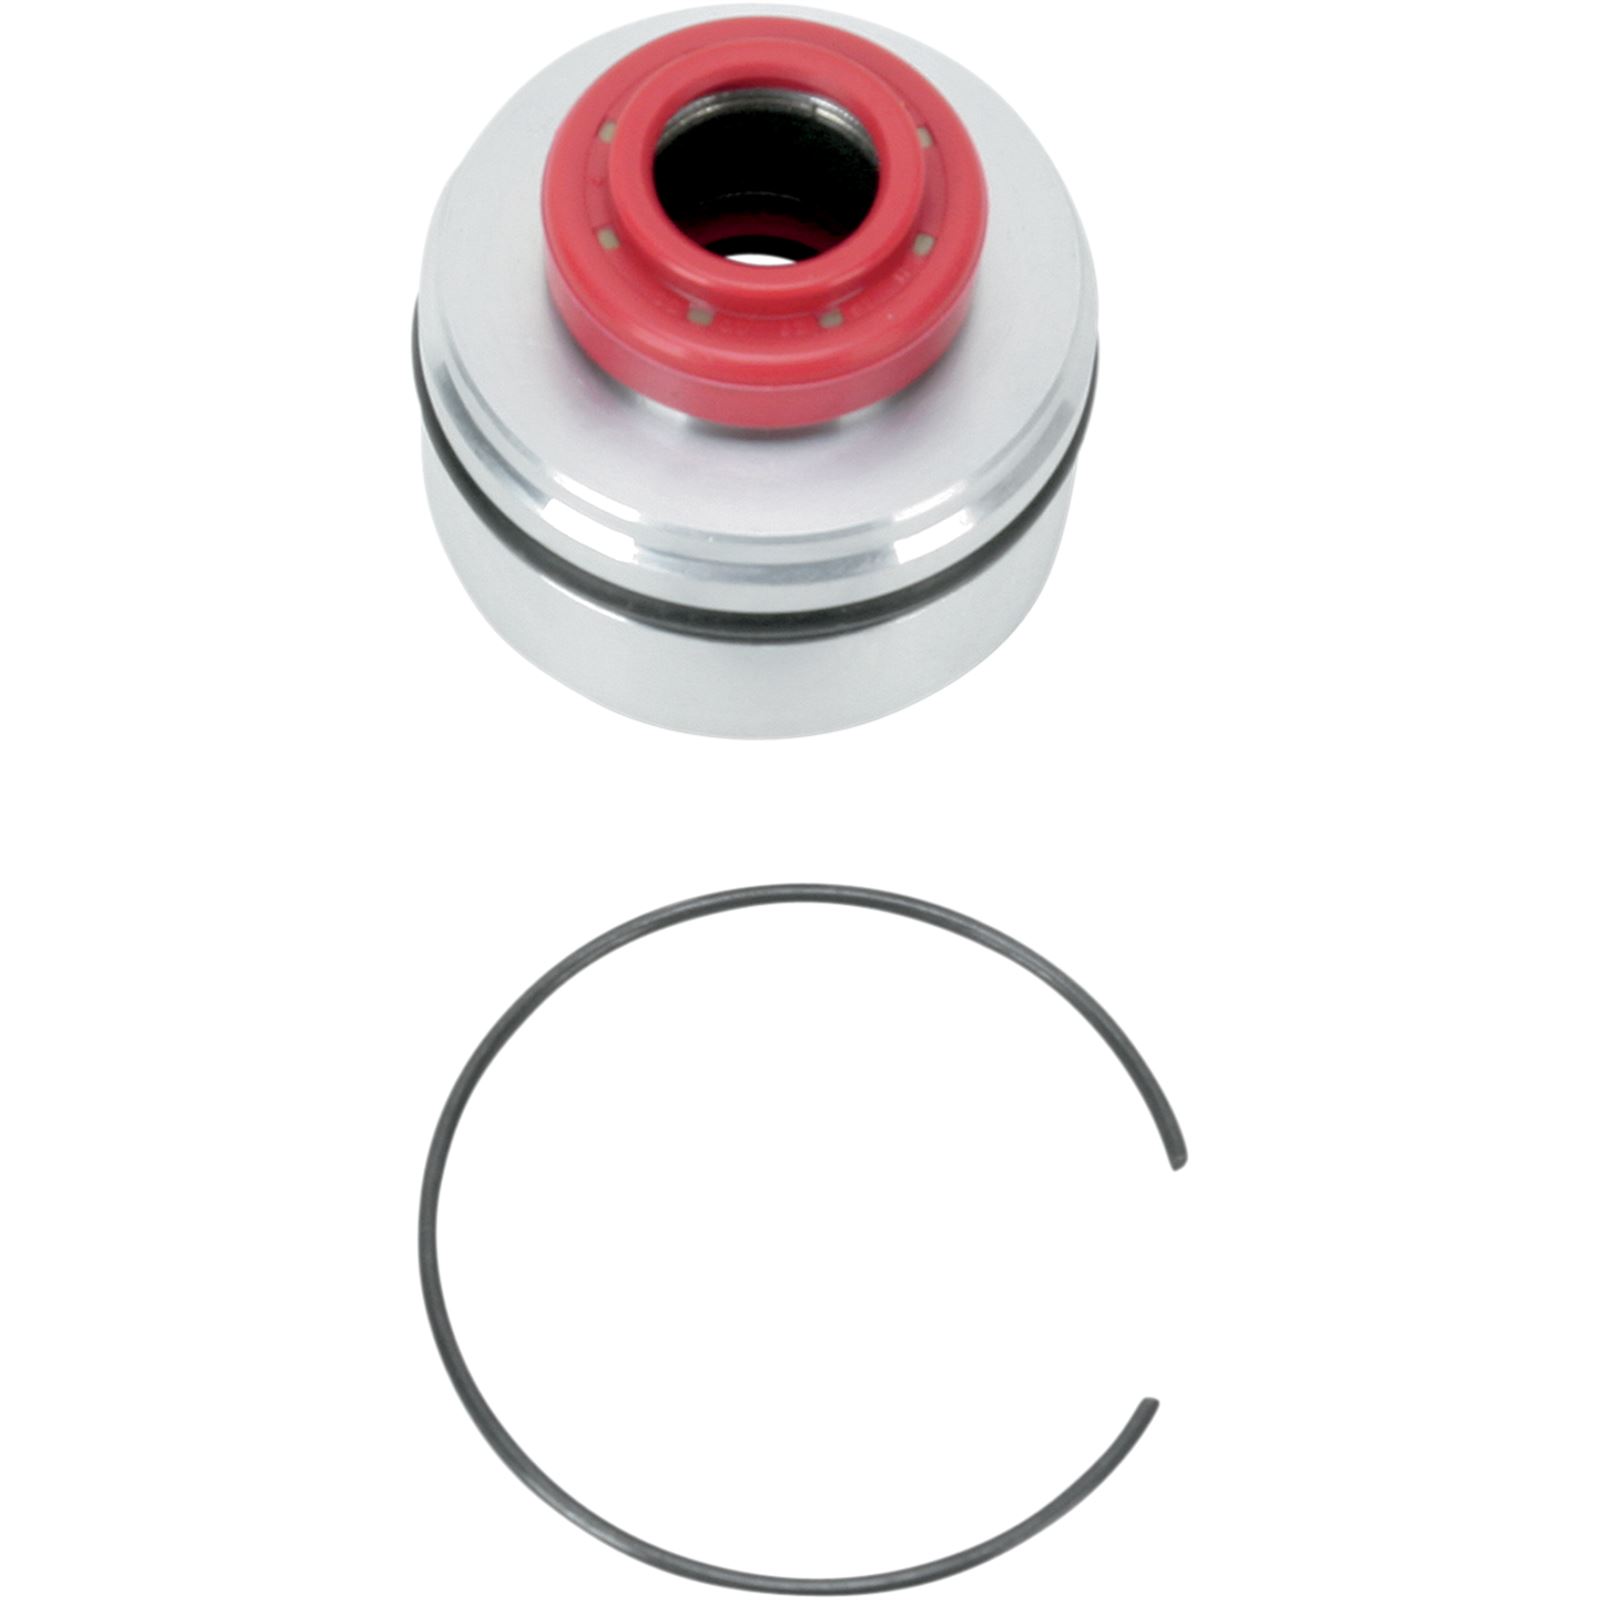 Moose Racing Shock Seal Head - 18 mm ID x 50 mm OD - Snap Ring 53 x 2 Round